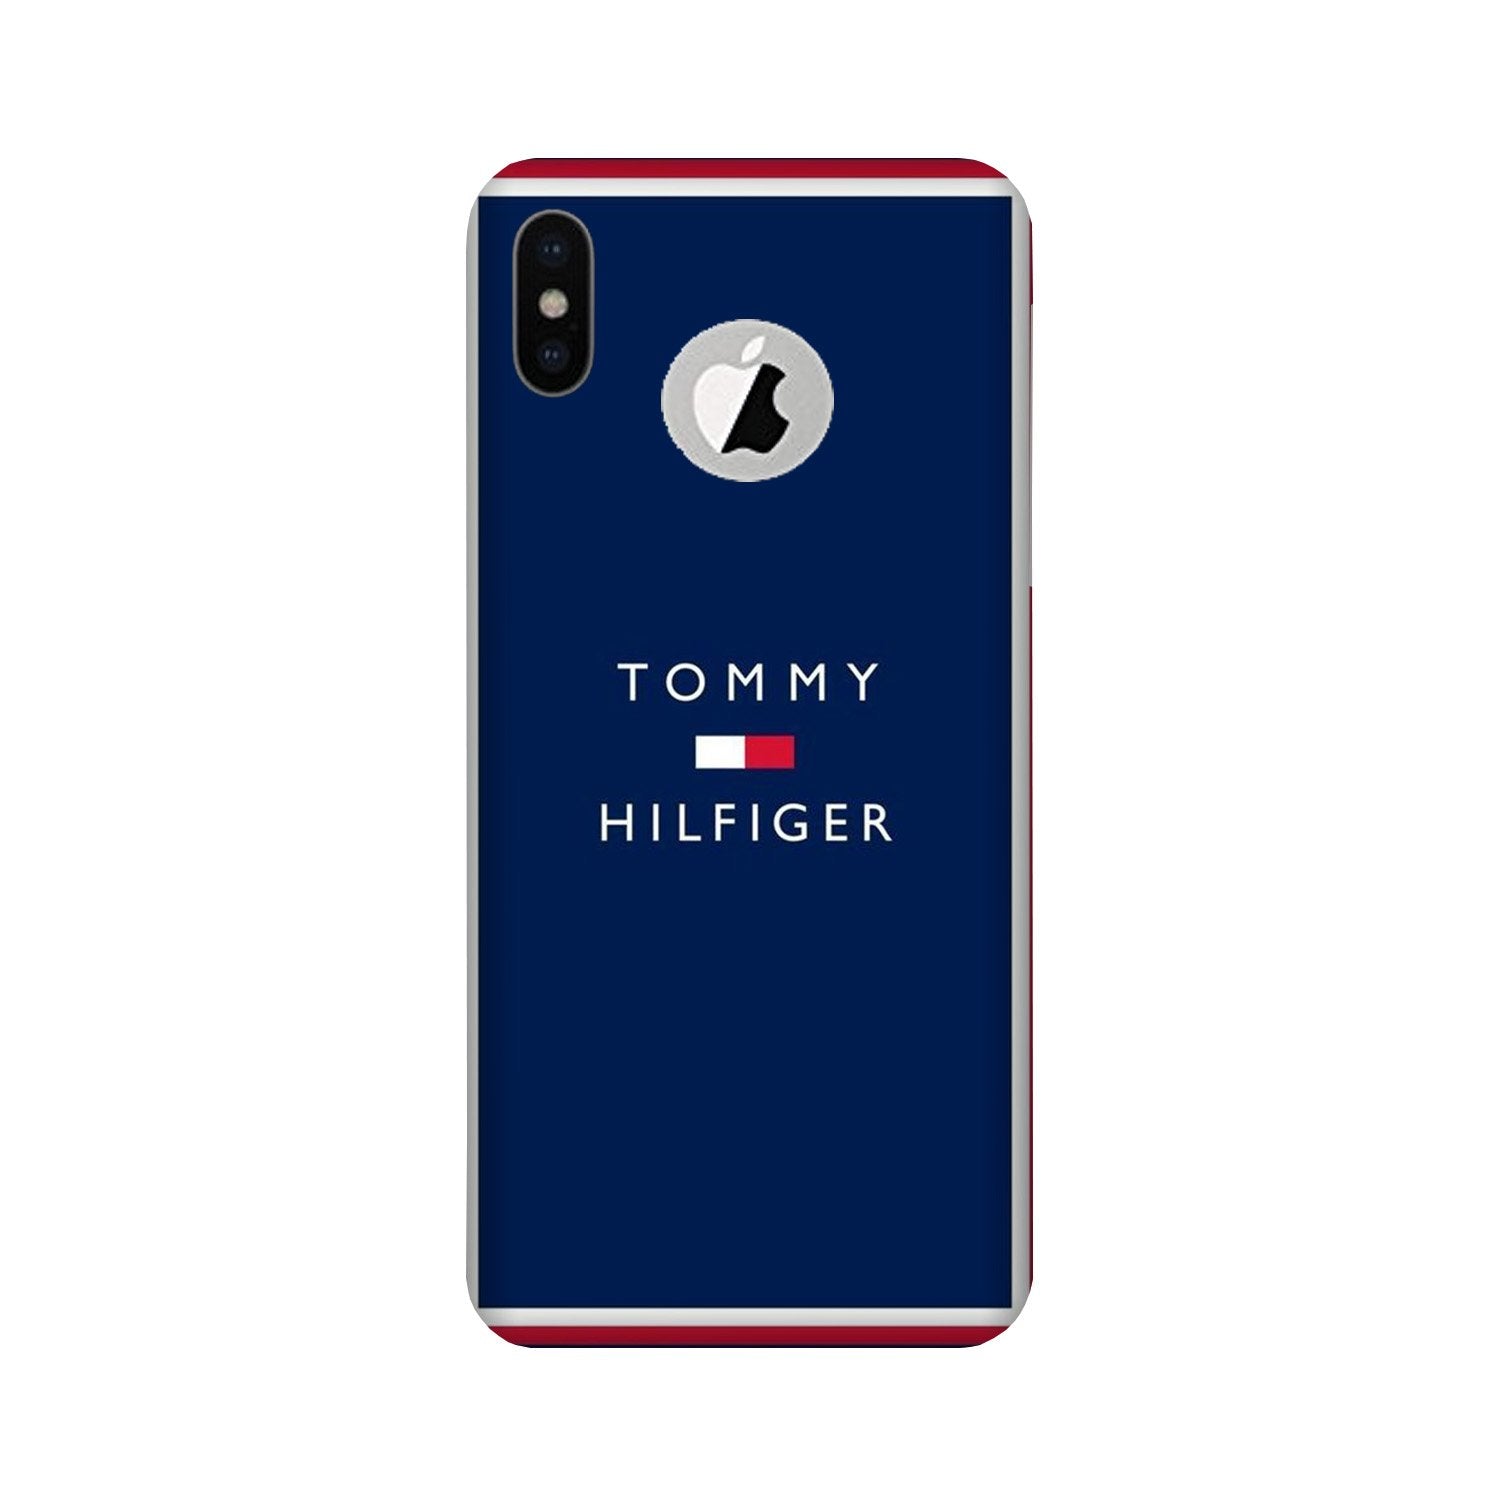 Tommy Hilfiger Case for iPhone Xs logo cut  (Design No. 275)